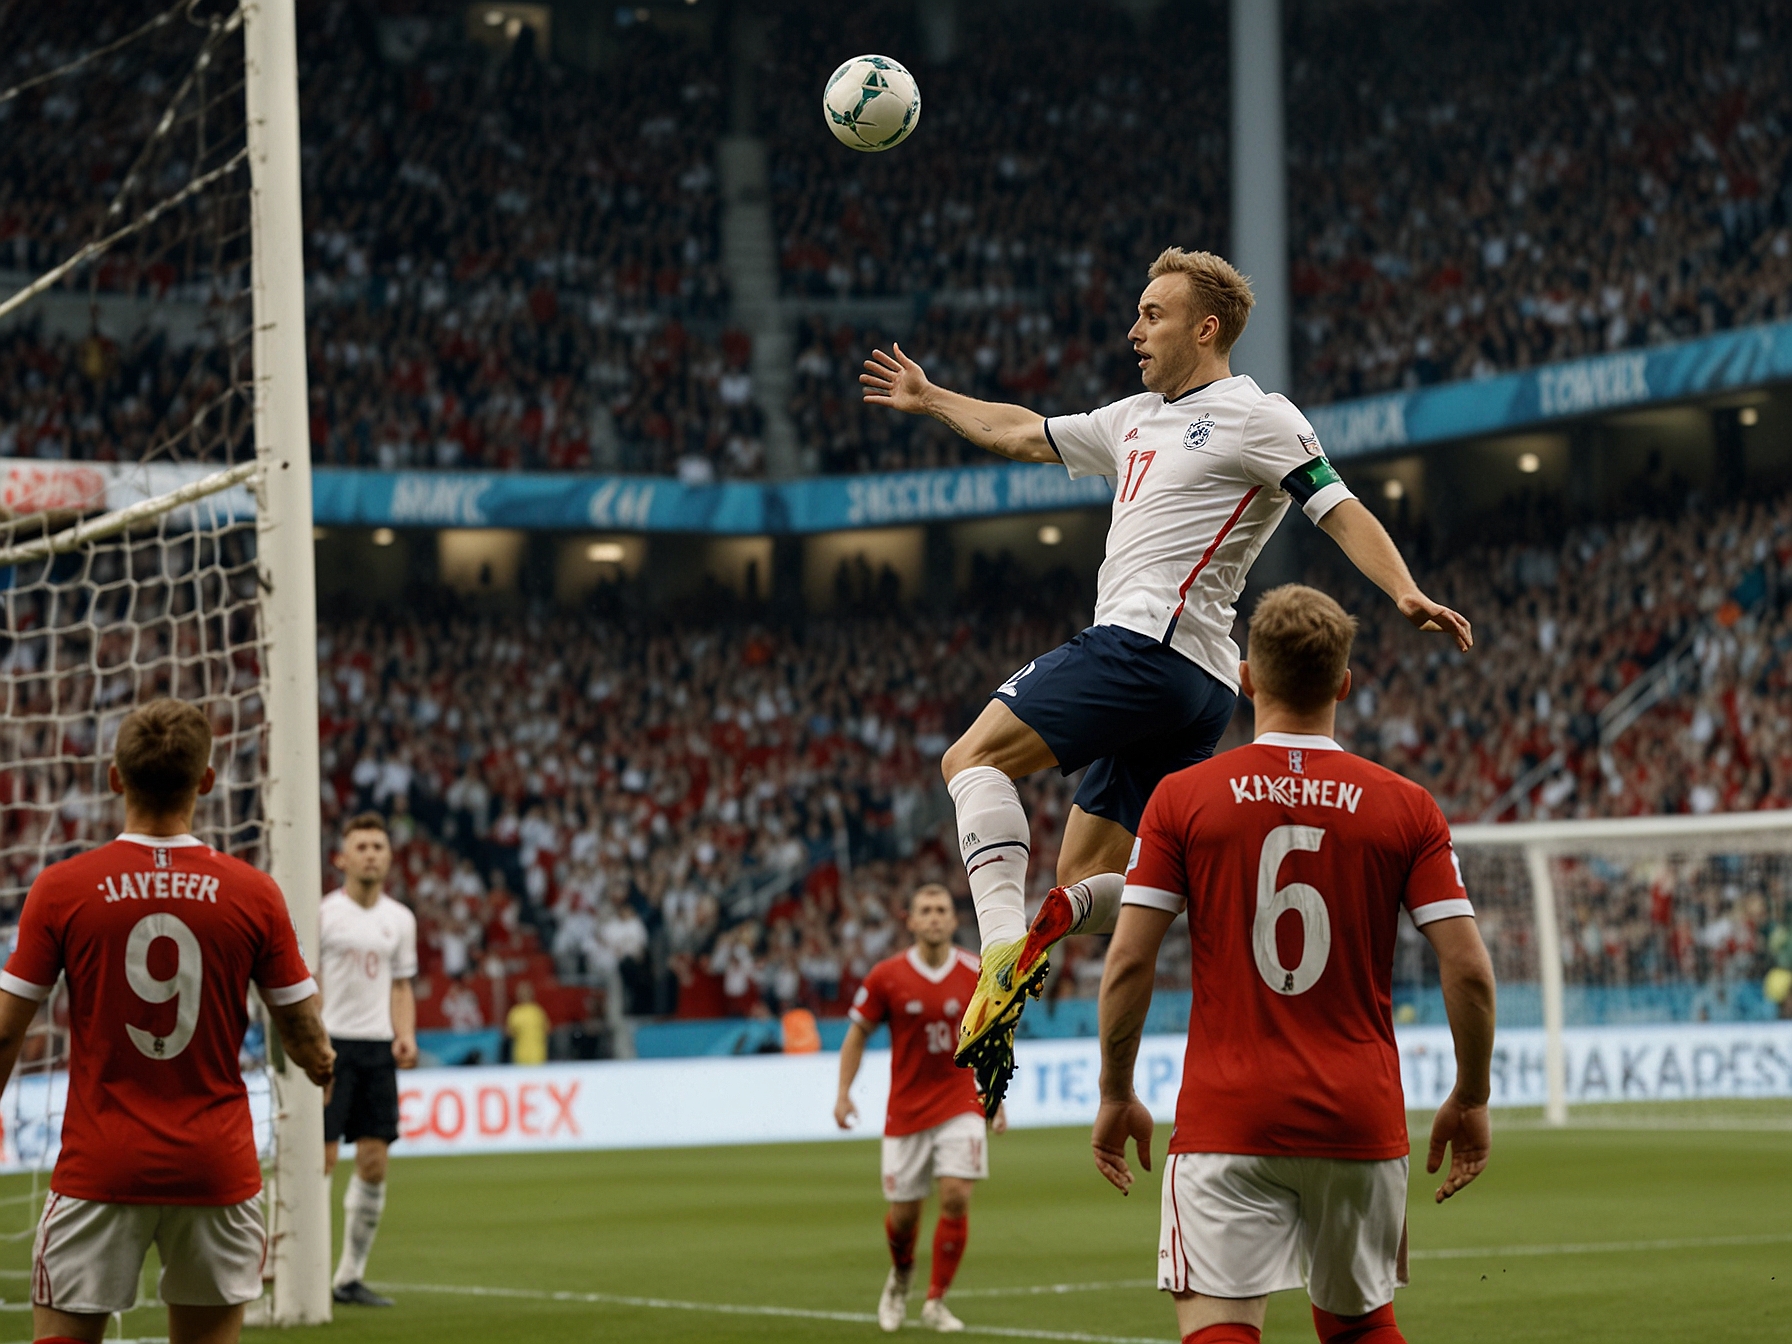 Christian Eriksen delivers a precise corner kick which leads to Simon Kjaer's towering header that gives Denmark the lead just before halftime, igniting the home crowd's celebrations.